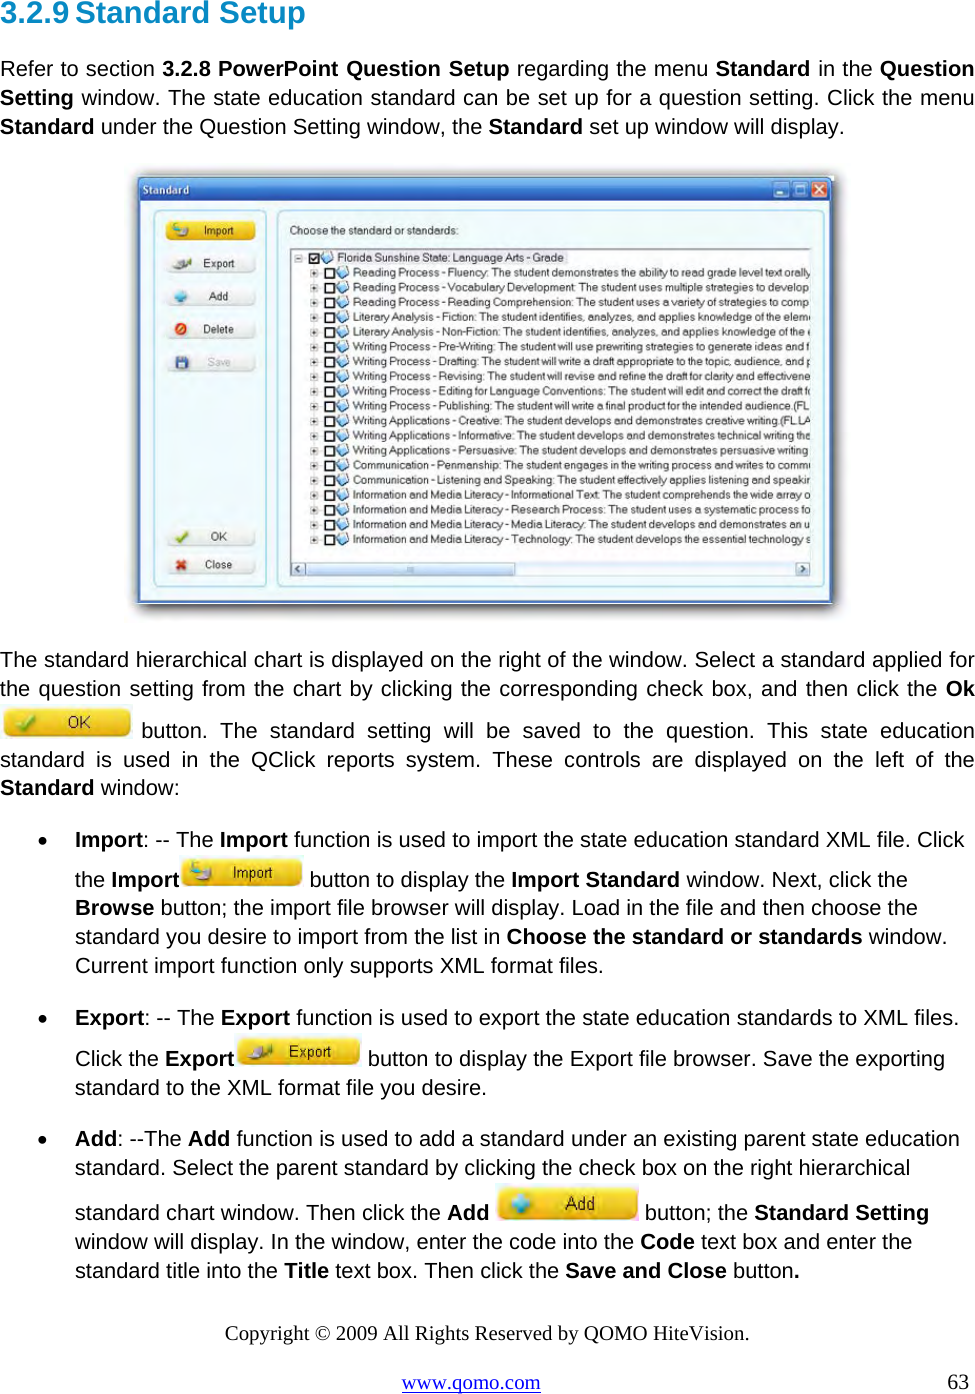 Copyright © 2009 All Rights Reserved by QOMO HiteVision. www.qomo.com                                                                          63  3.2.9 Standard Setup Refer to section 3.2.8 PowerPoint Question Setup regarding the menu Standard in the Question Setting window. The state education standard can be set up for a question setting. Click the menu Standard under the Question Setting window, the Standard set up window will display.  The standard hierarchical chart is displayed on the right of the window. Select a standard applied for the question setting from the chart by clicking the corresponding check box, and then click the Ok  button. The standard setting will be saved to the question. This state education standard is used in the QClick reports system. These controls are displayed on the left of the Standard window: •  Import: -- The Import function is used to import the state education standard XML file. Click the Import  button to display the Import Standard window. Next, click the Browse button; the import file browser will display. Load in the file and then choose the standard you desire to import from the list in Choose the standard or standards window. Current import function only supports XML format files. •  Export: -- The Export function is used to export the state education standards to XML files. Click the Export  button to display the Export file browser. Save the exporting standard to the XML format file you desire. •  Add: --The Add function is used to add a standard under an existing parent state education standard. Select the parent standard by clicking the check box on the right hierarchical standard chart window. Then click the Add   button; the Standard Setting window will display. In the window, enter the code into the Code text box and enter the standard title into the Title text box. Then click the Save and Close button.  